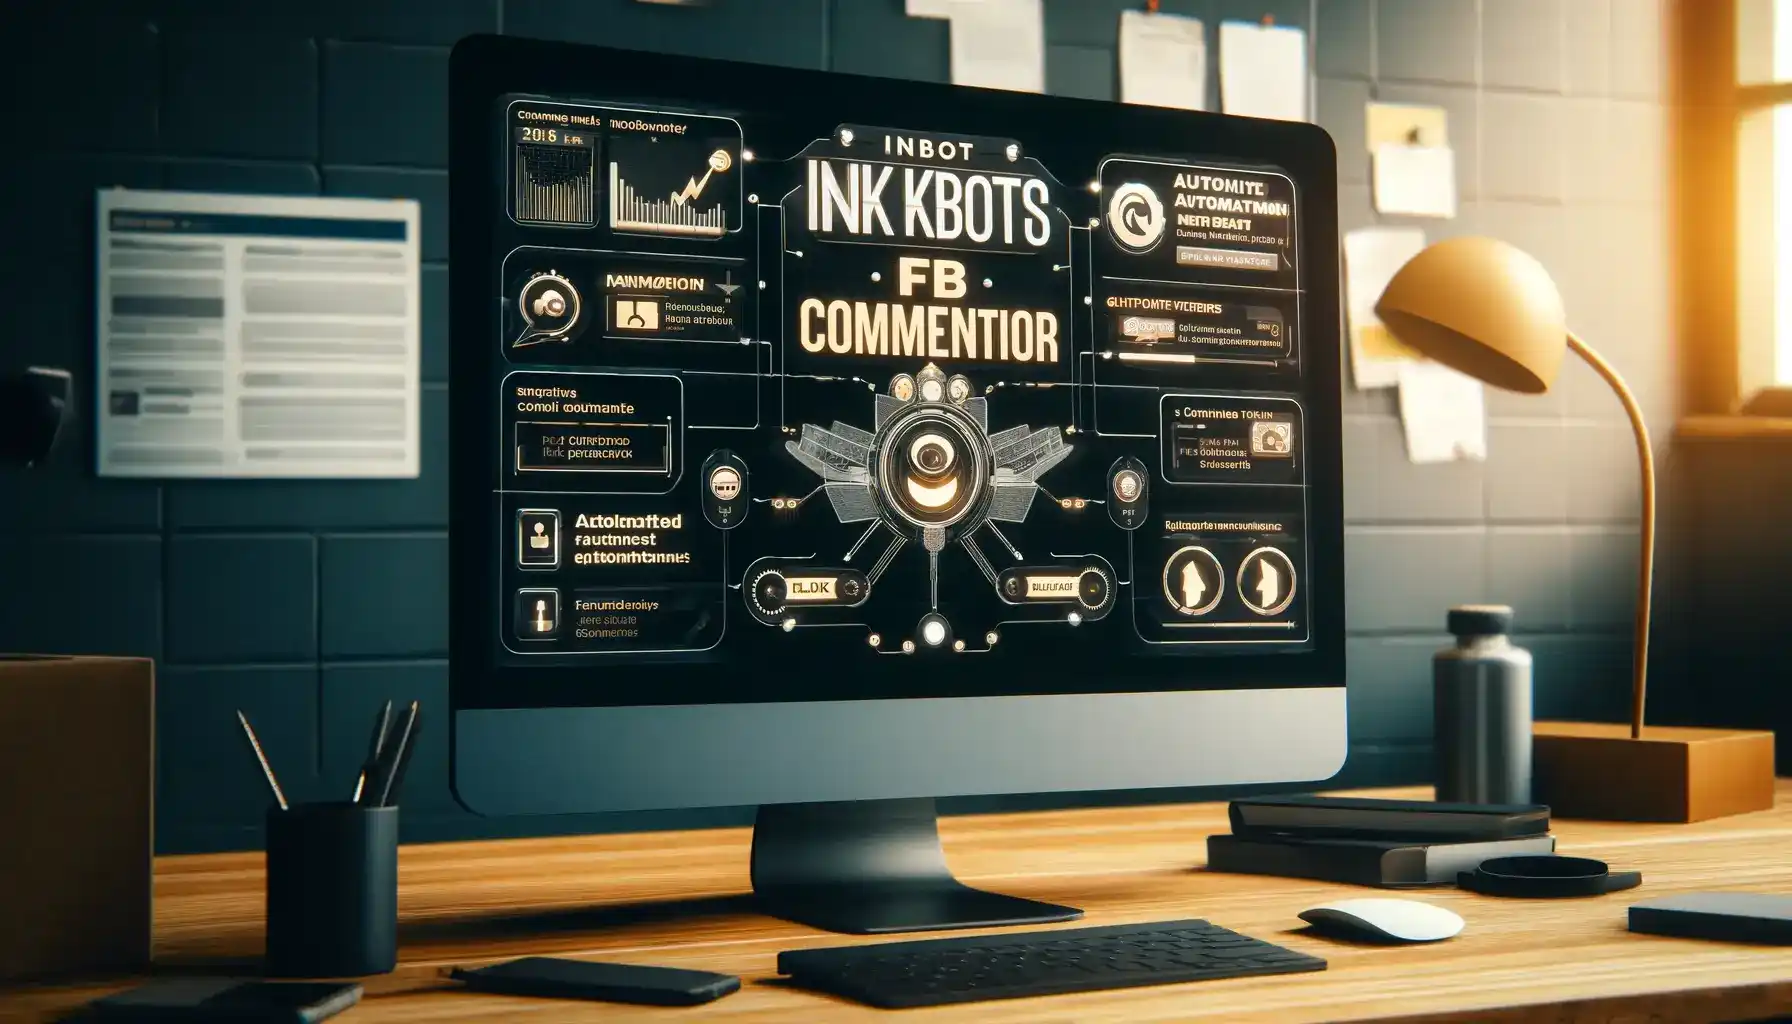 InkBot's FB Commentor interface on a monitor with automation features.